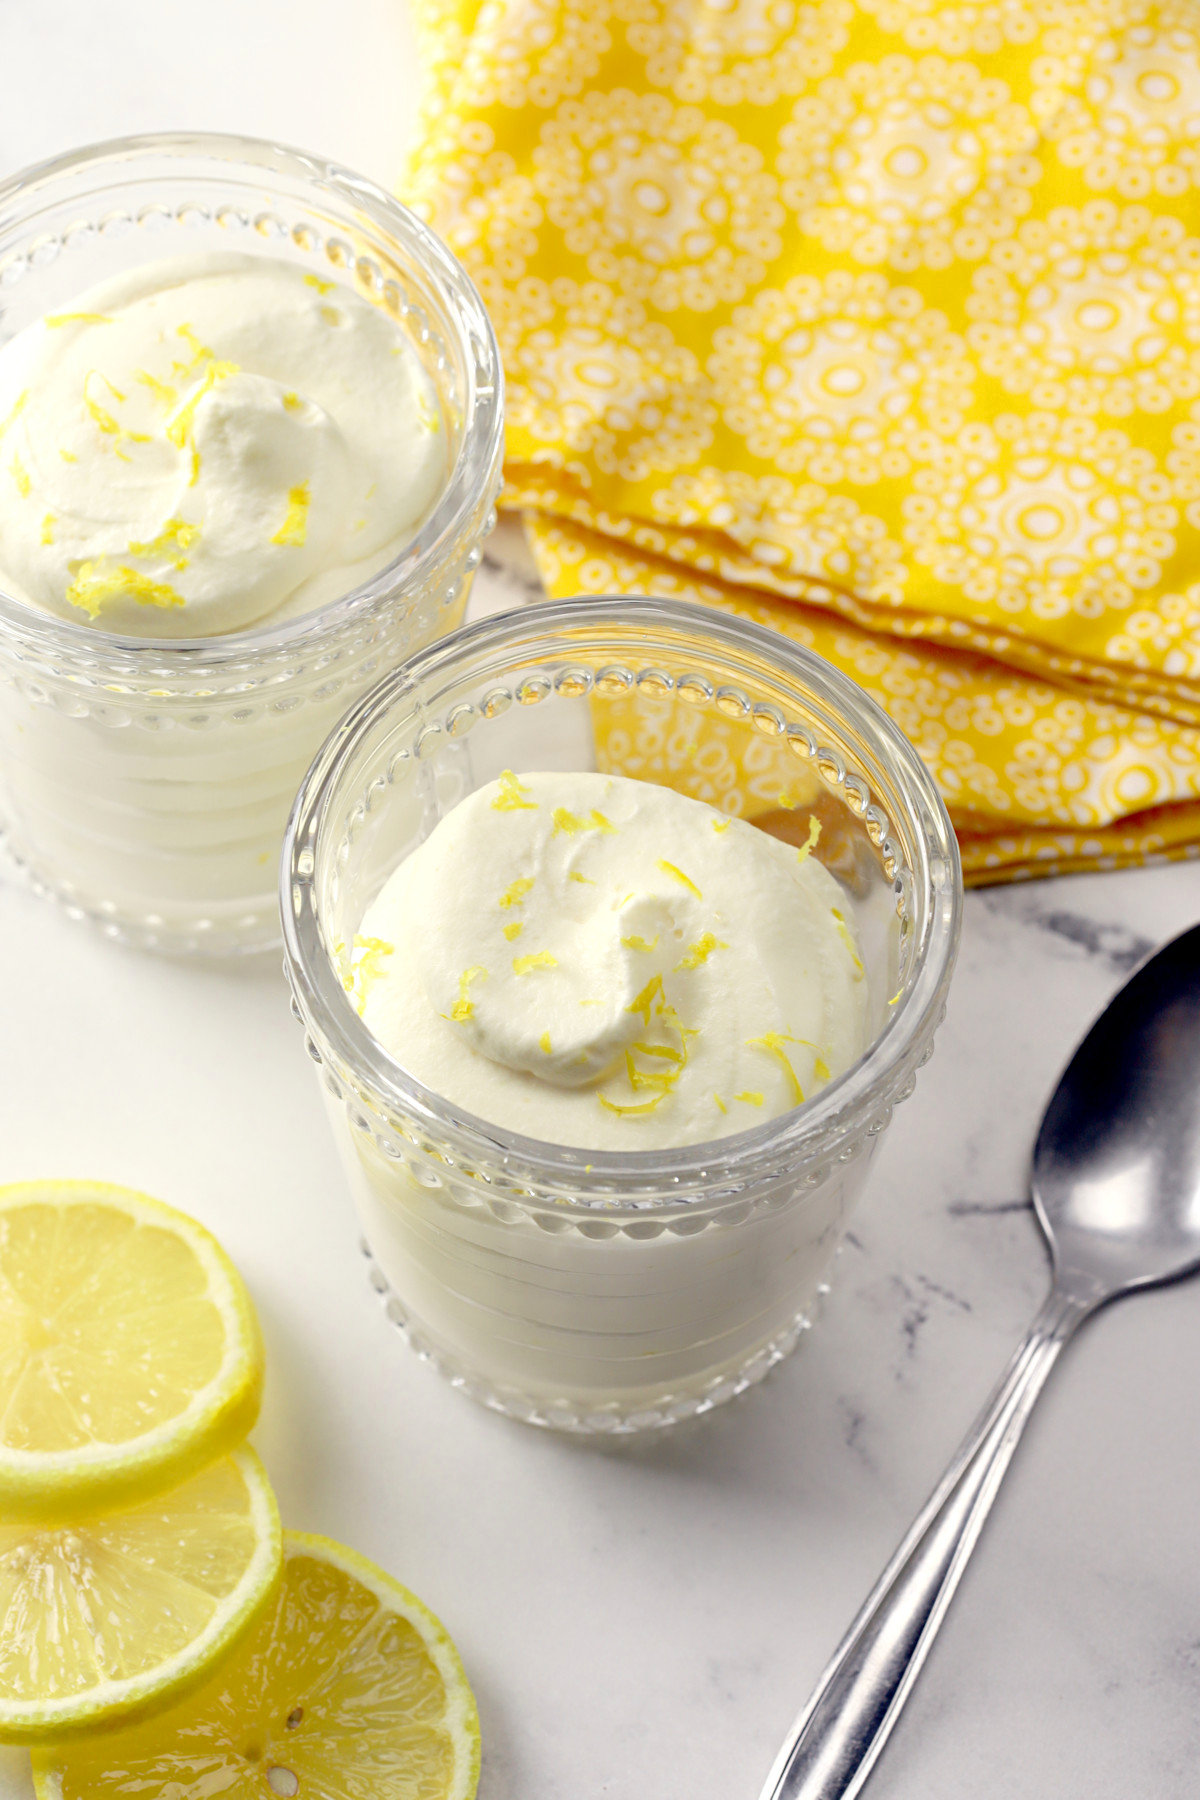 Two glass dishes filled with lemon mousse.